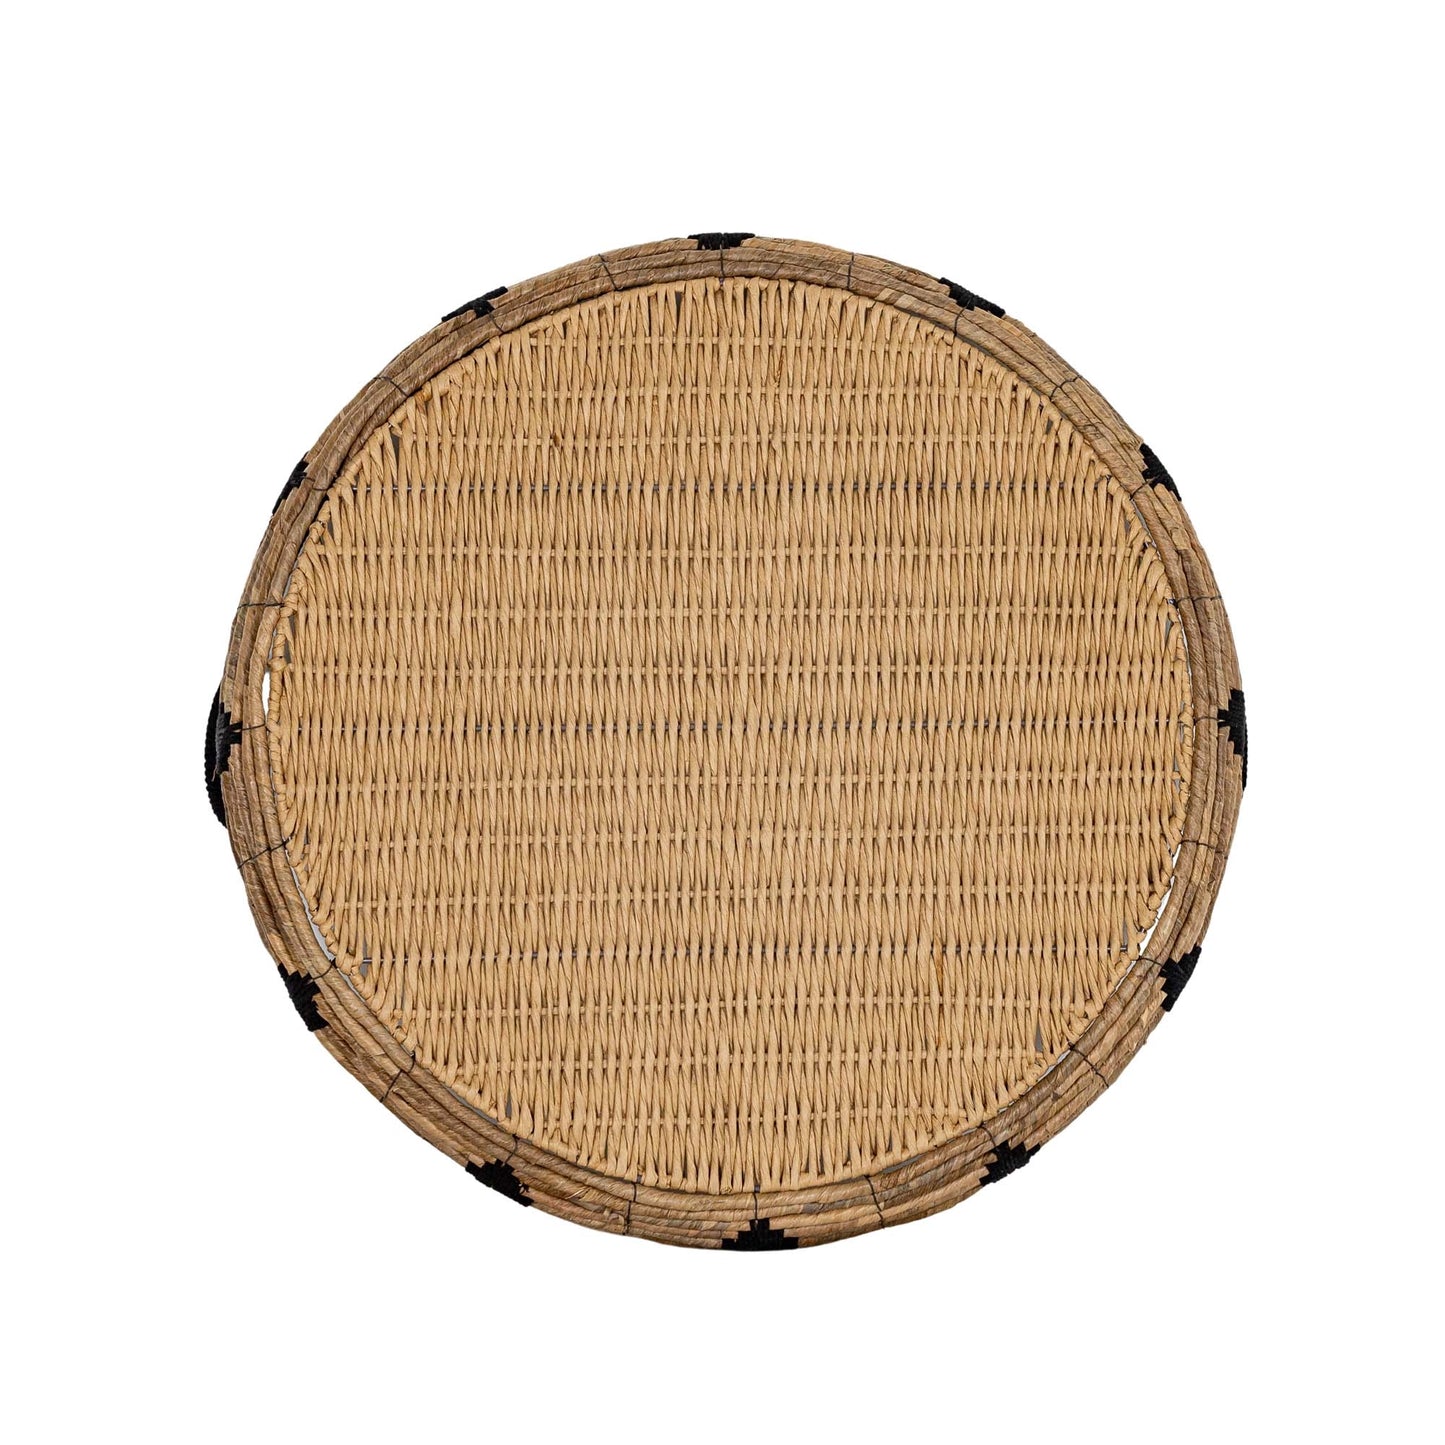 Oversized Seagrass Round Tray - Natural + Black